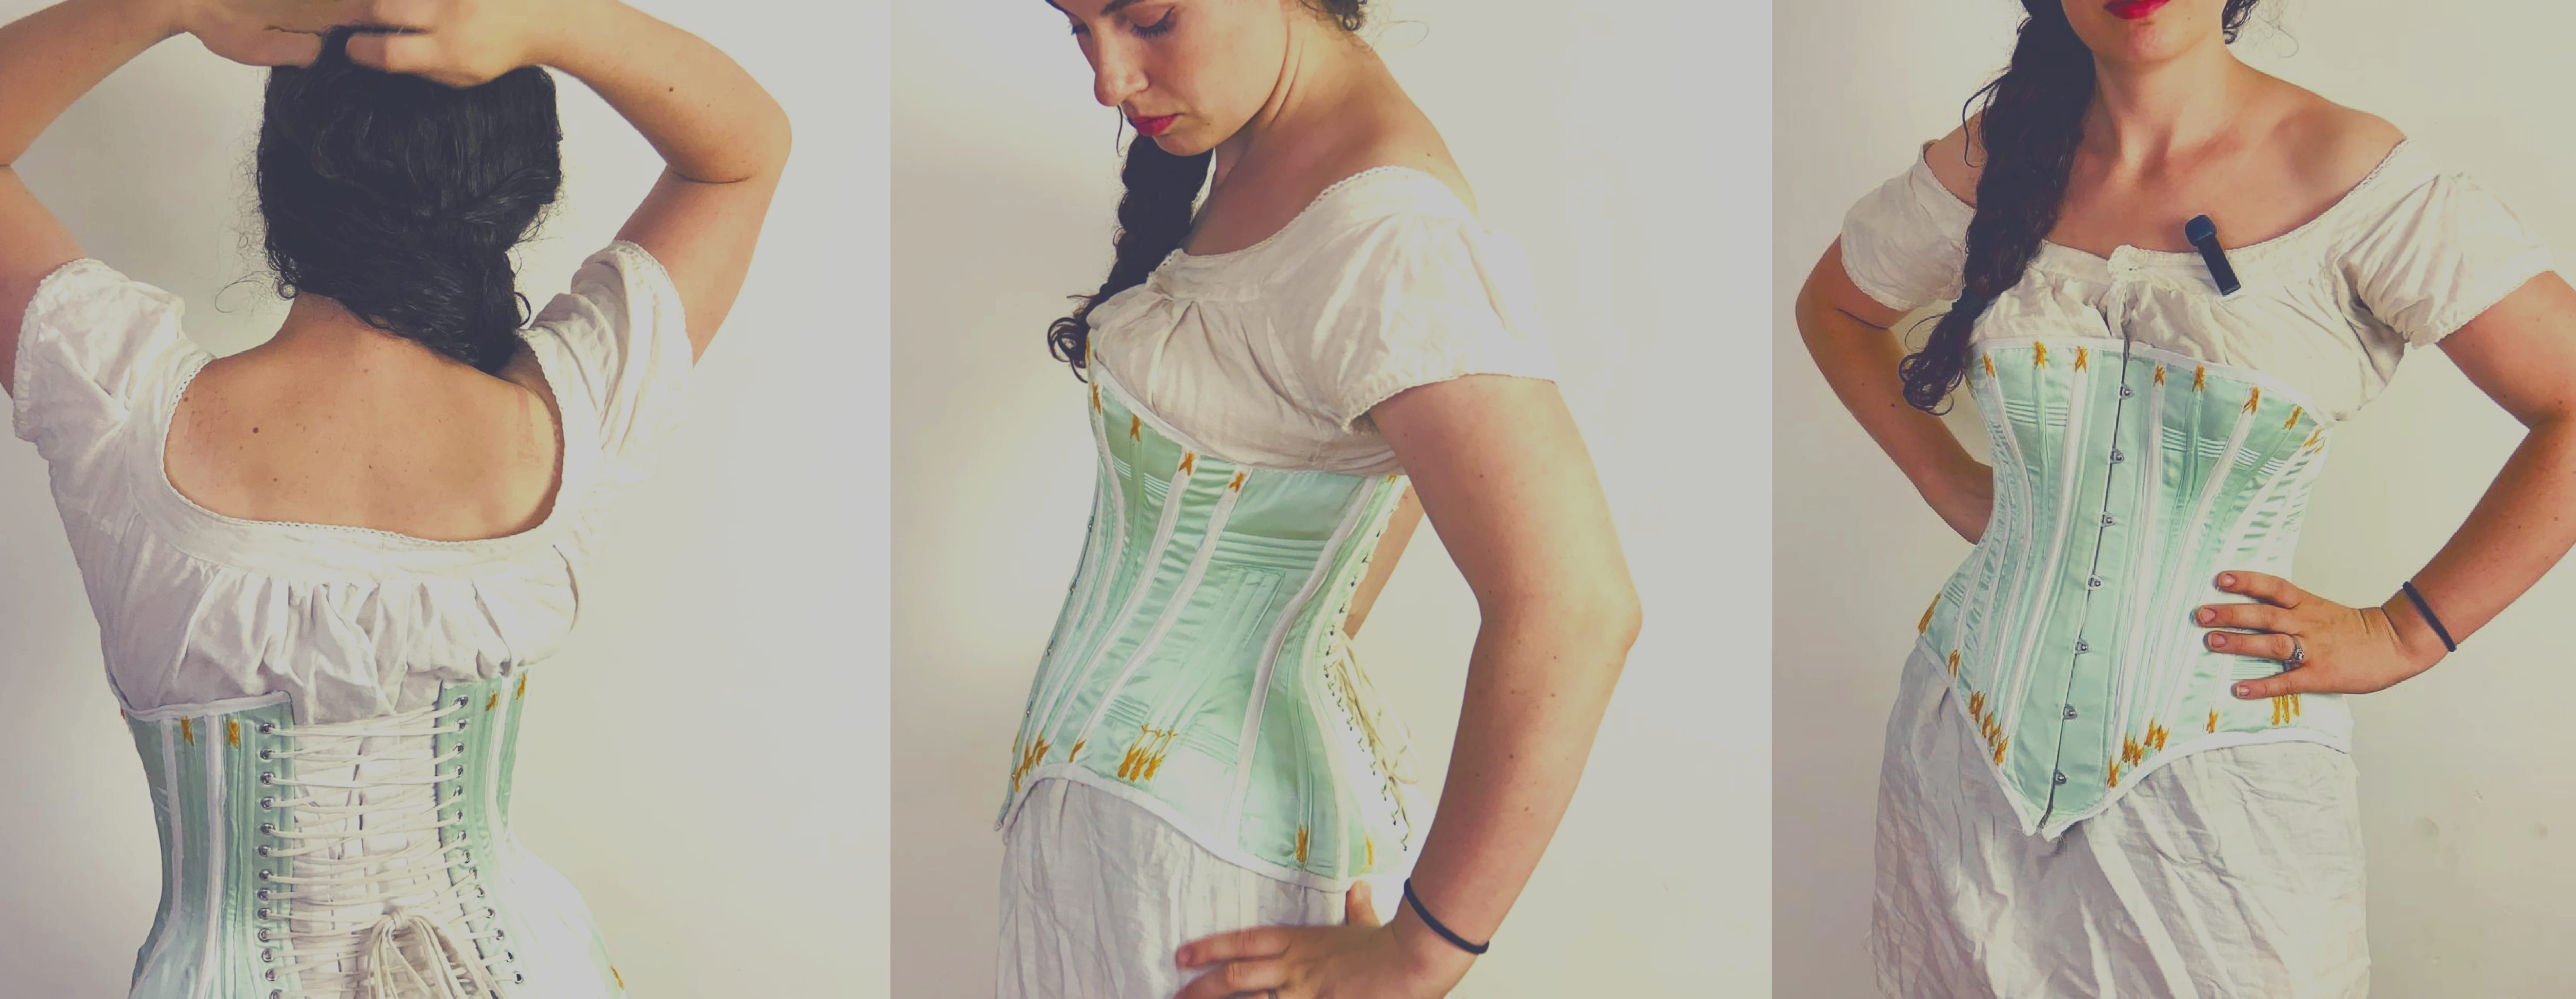 Corset lacing: how to put a corset on  Fashion sewing, Corset fashion, Diy  sewing clothes